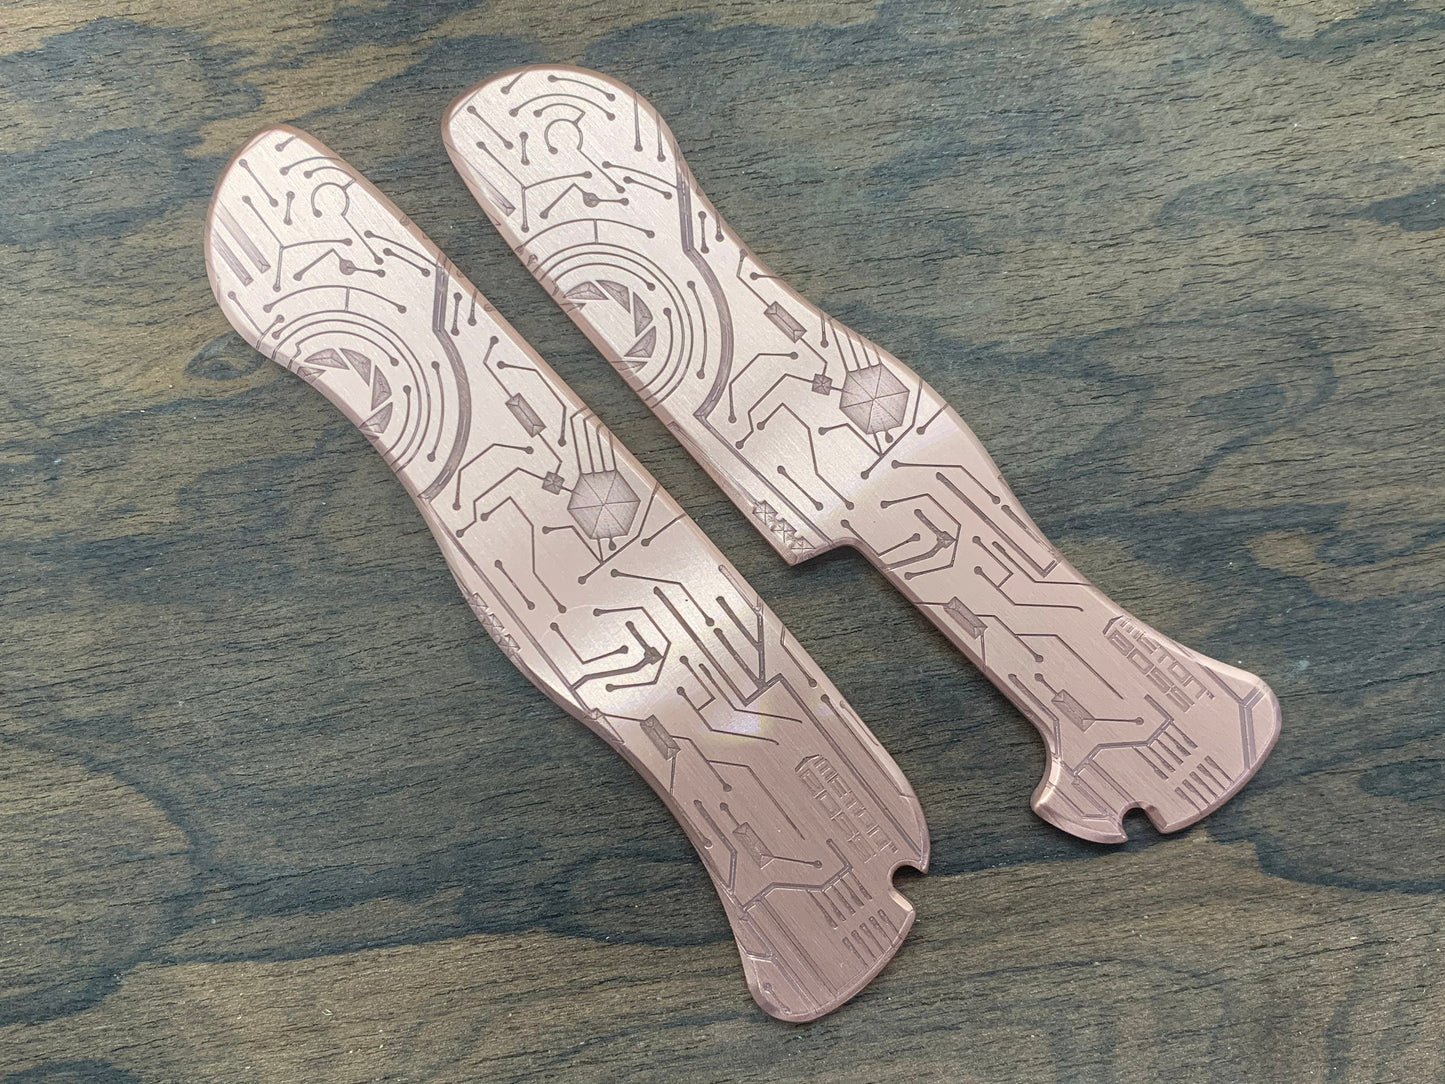 111mm CIRCUIT BOARD engraved Copper Scales for Swiss Army SAK